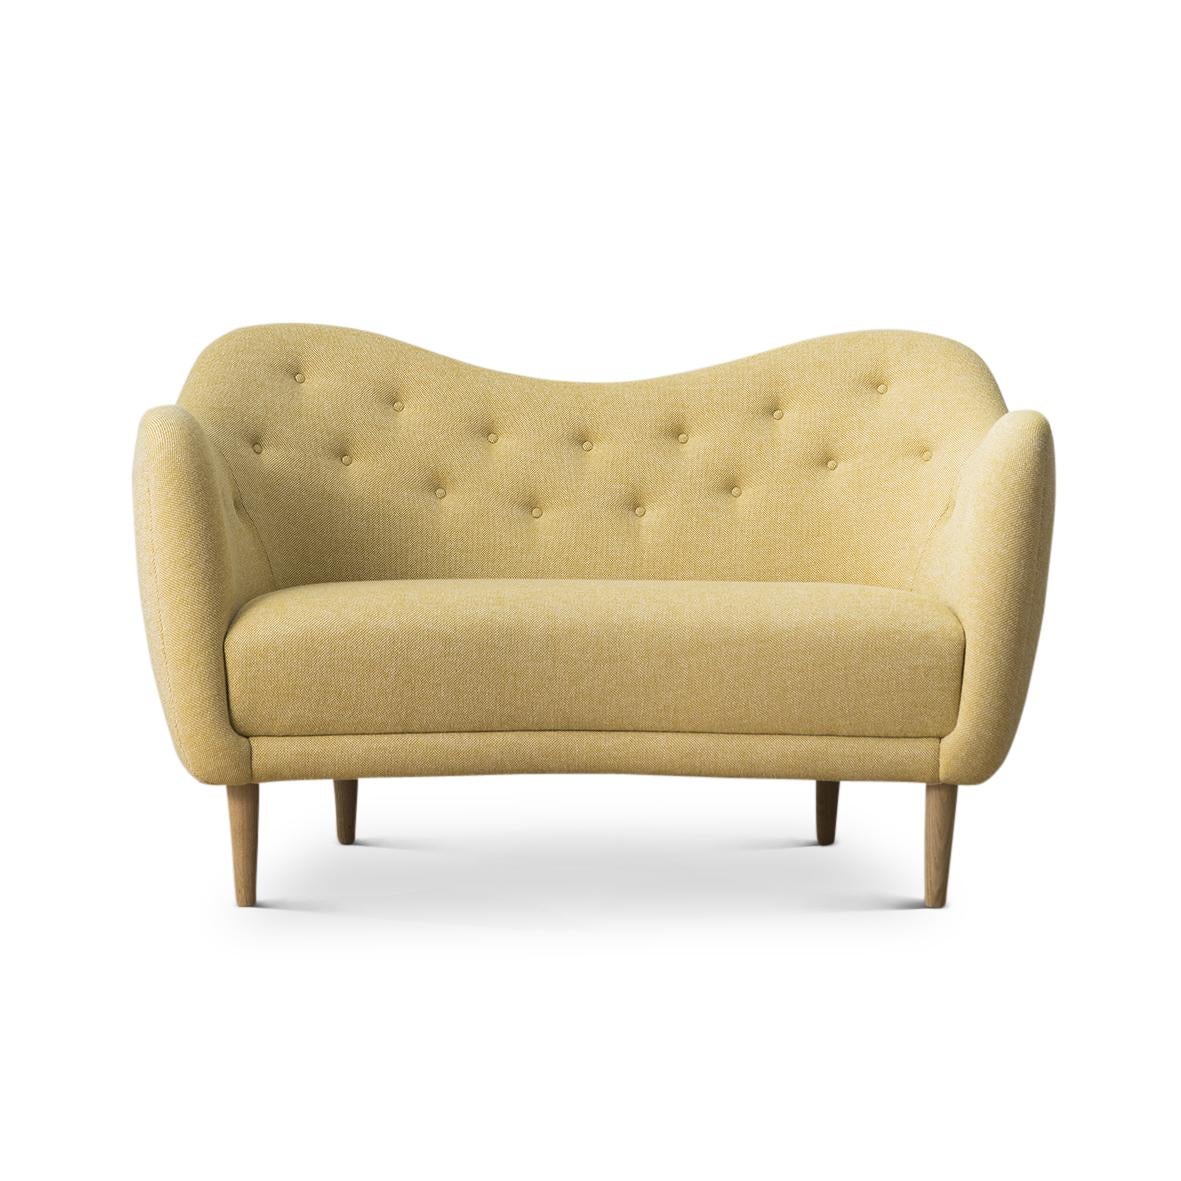 Sofa designed by Finn Juhl in 1946, relaunched in 2008.
Manufactured by House of Finn Juhl in Denmark.

As the name suggests, this sofa was designed in 1946. The sofa was manufactured by the upholsterer Carl Brørup in his workshop in Copenhagen.

As